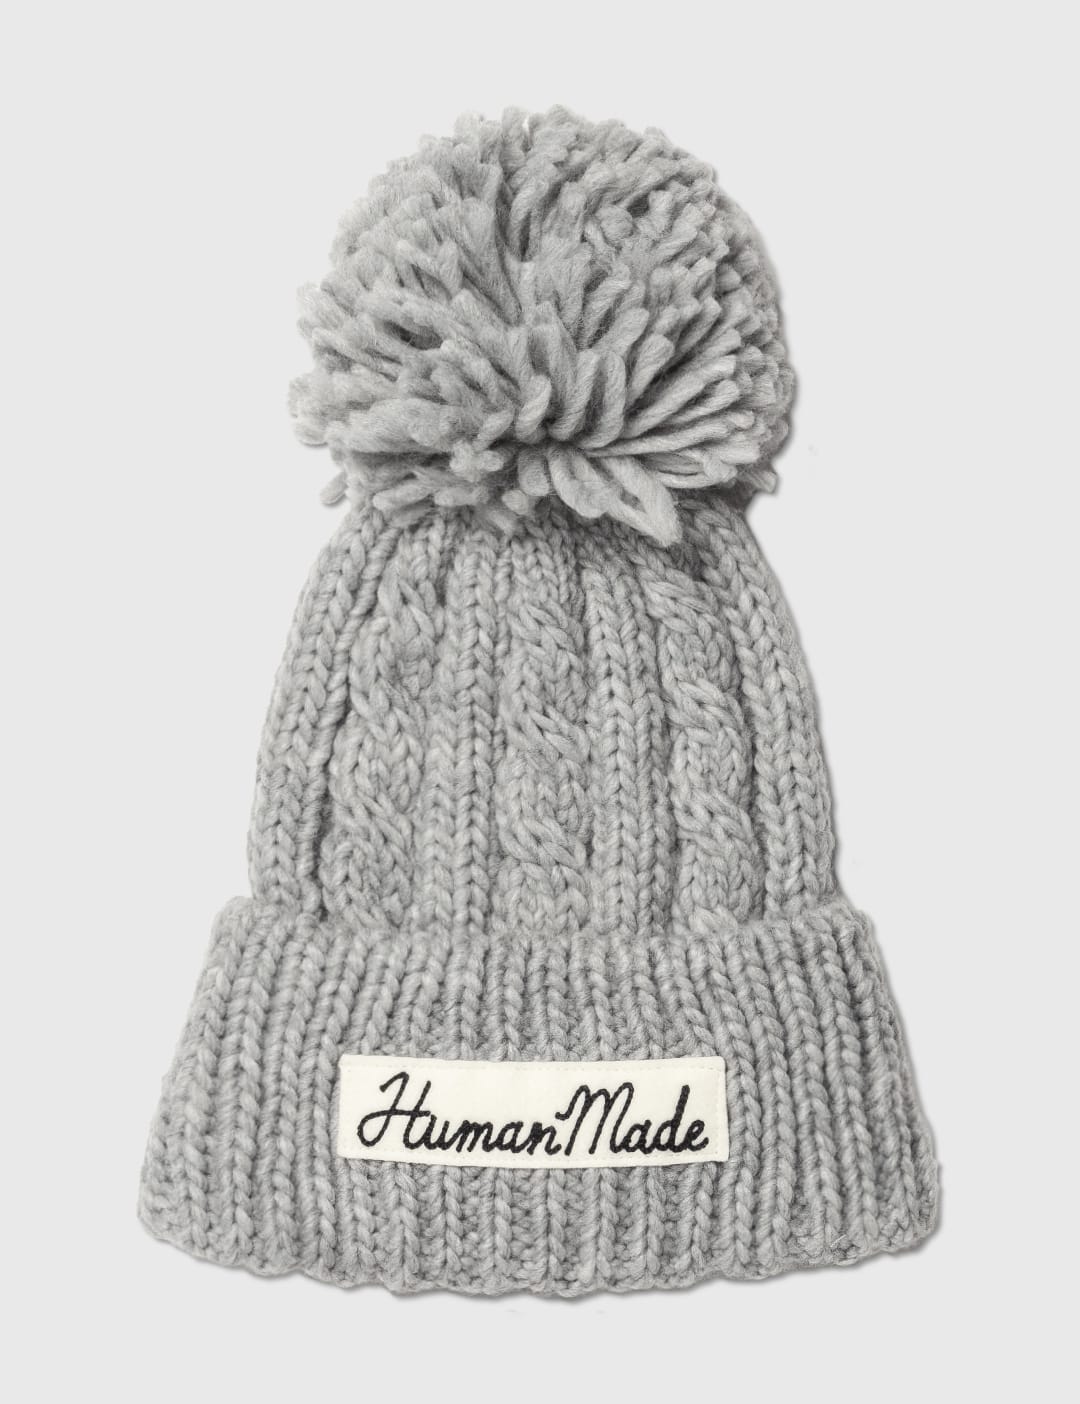 Human Made - Cable Pop Beanie | HBX - Globally Curated Fashion and  Lifestyle by Hypebeast